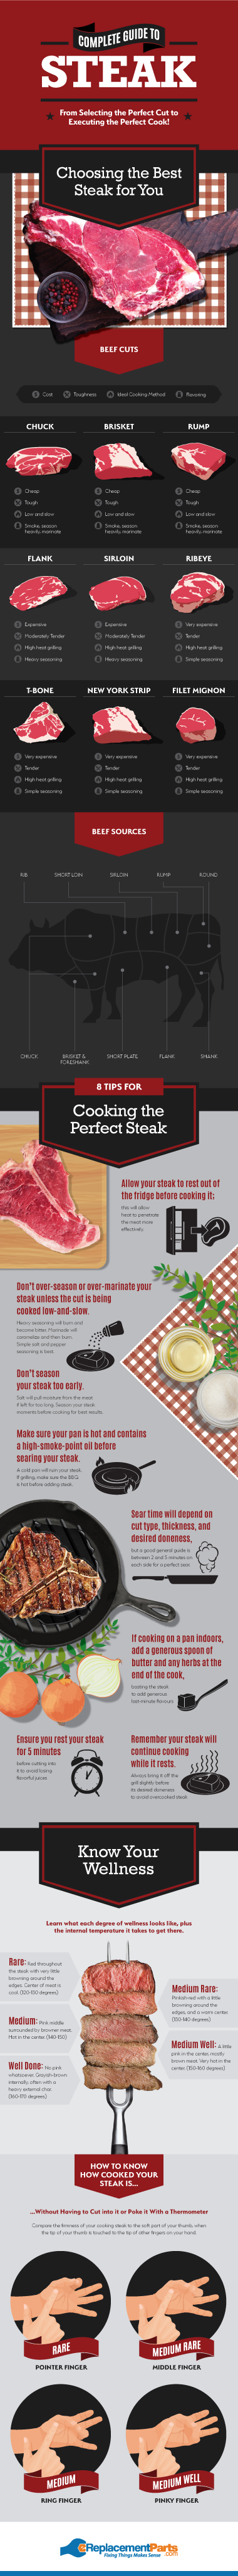 Tips for Choosing and Cooking Steak Perfectly